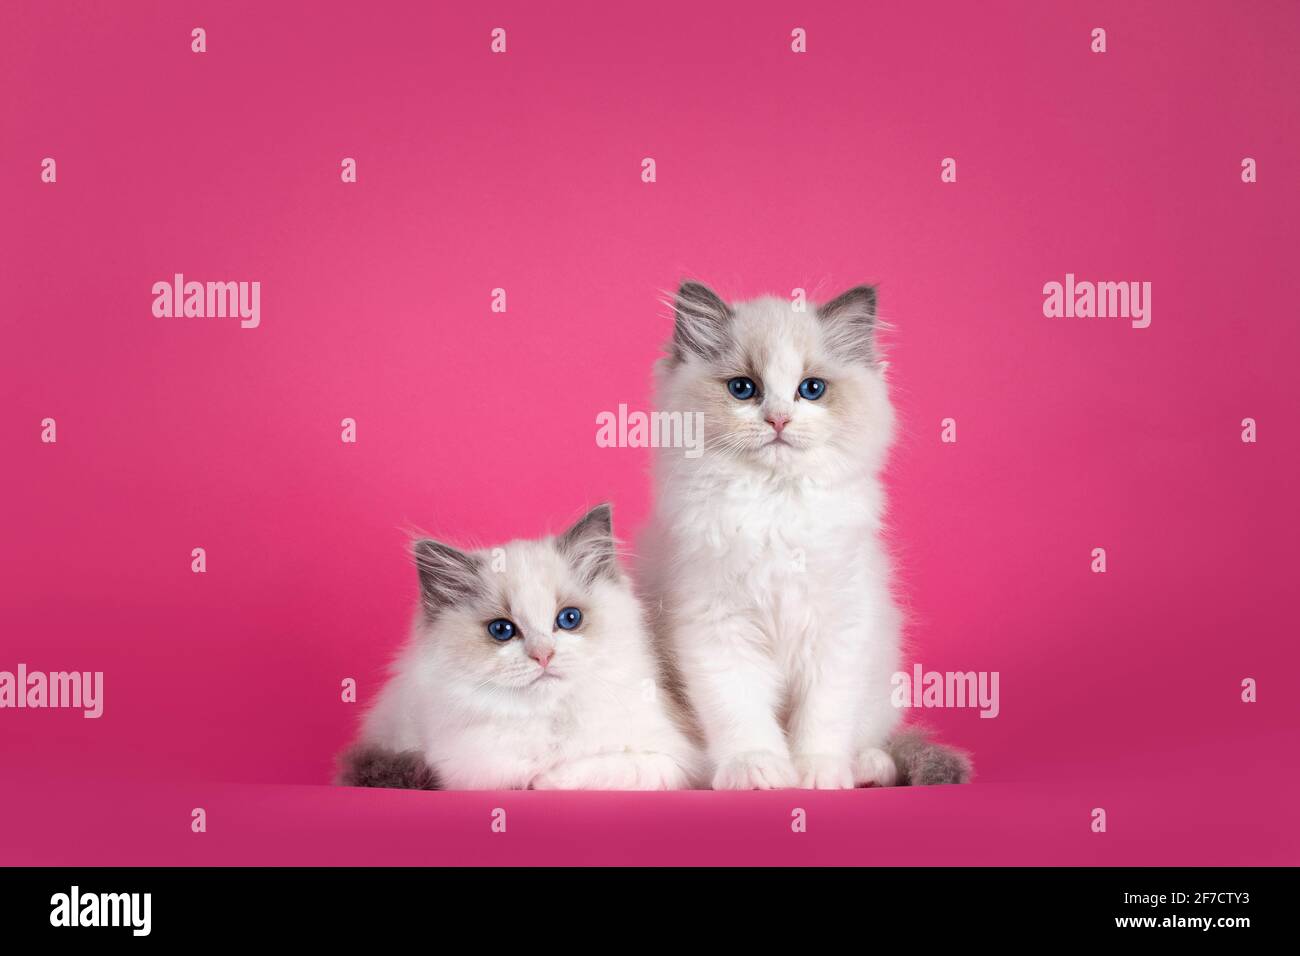 Two adorable Ragdoll cat kittens, laying and sitting beside each other facing front. Looking towards camera with amazing blue eyes. Isolated on a pink Stock Photo